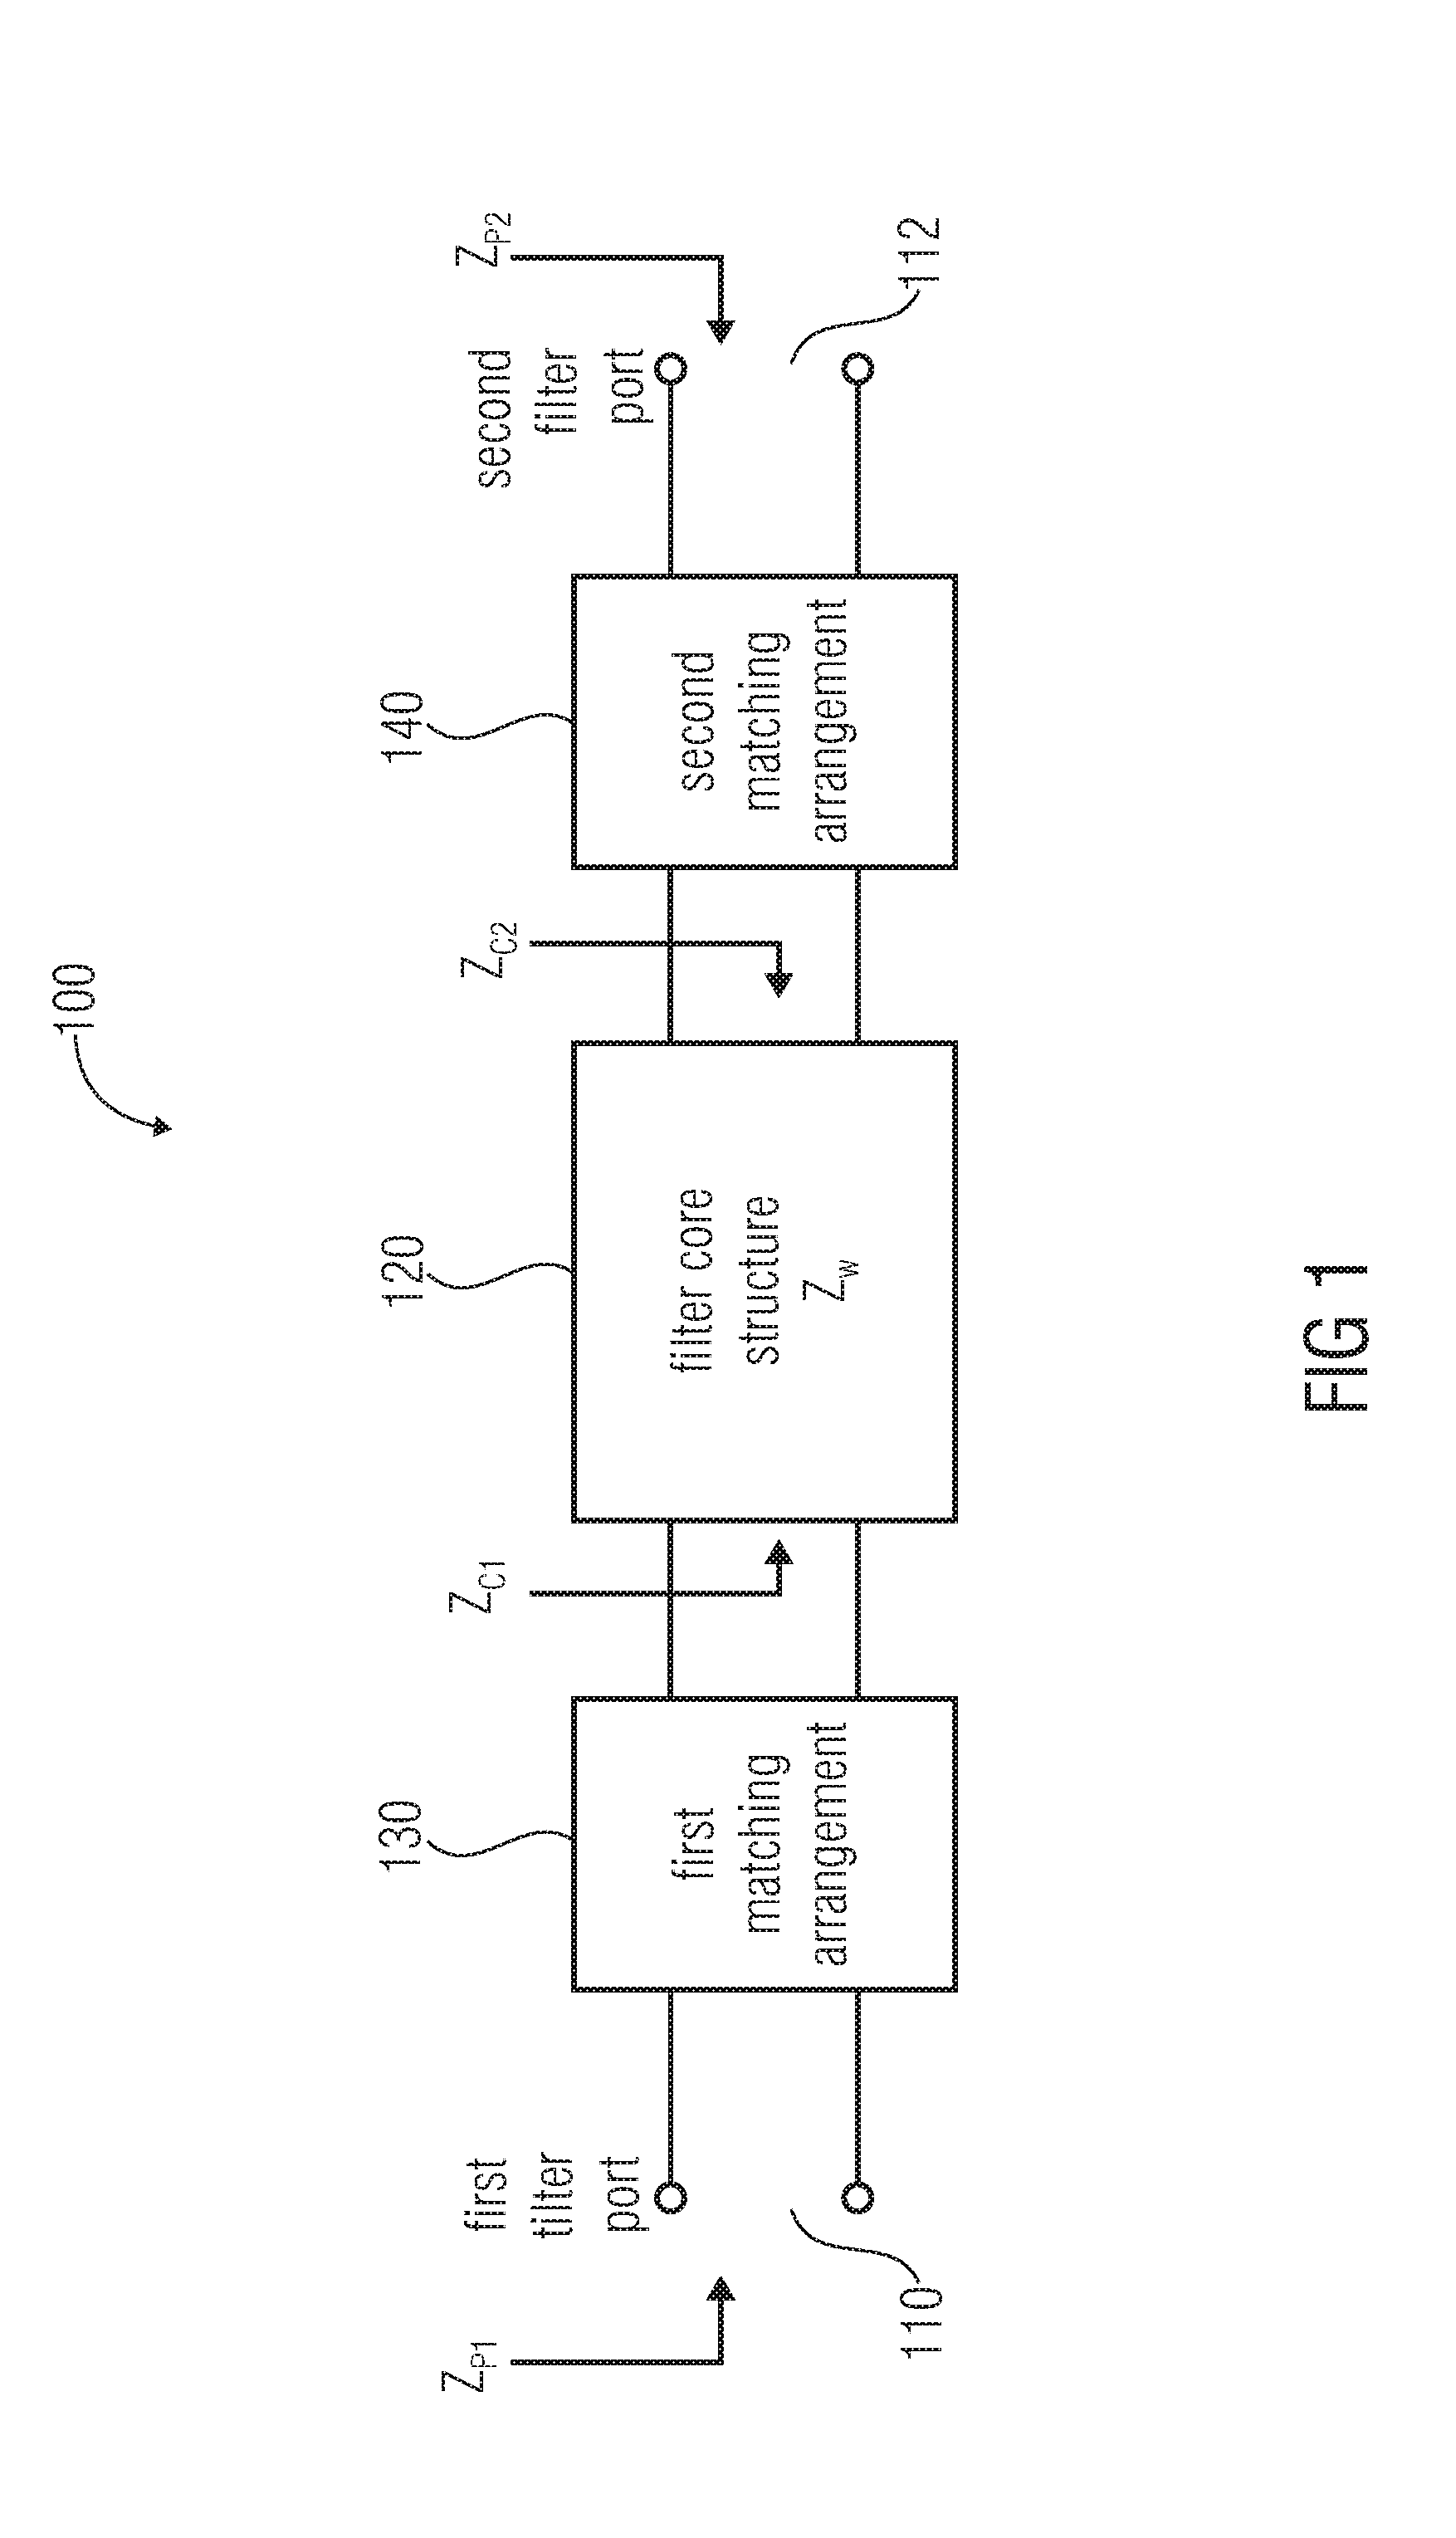 Electrical double filter structure